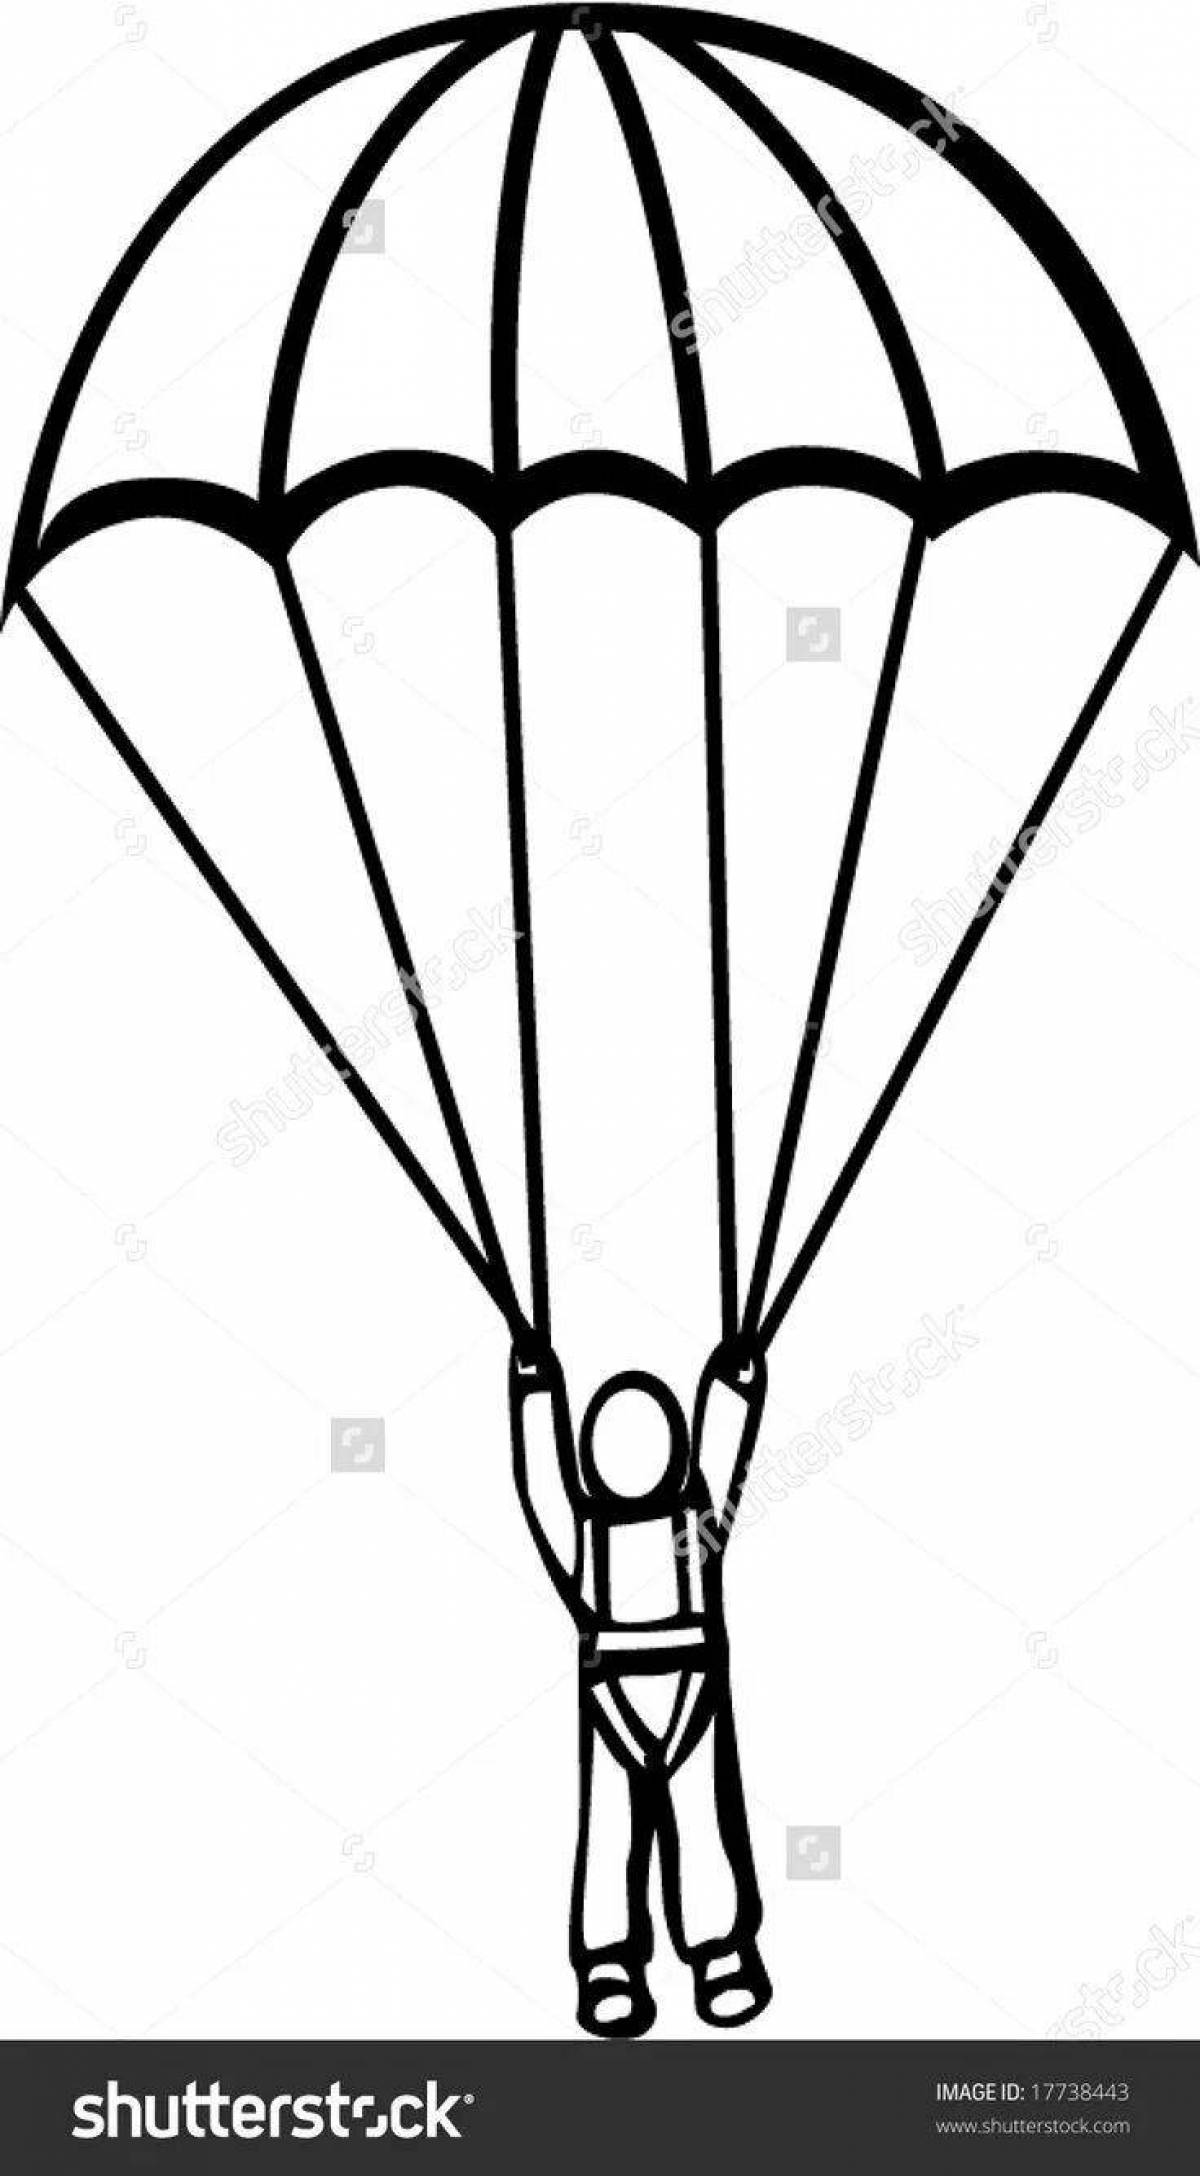 Exciting parachute coloring for juniors